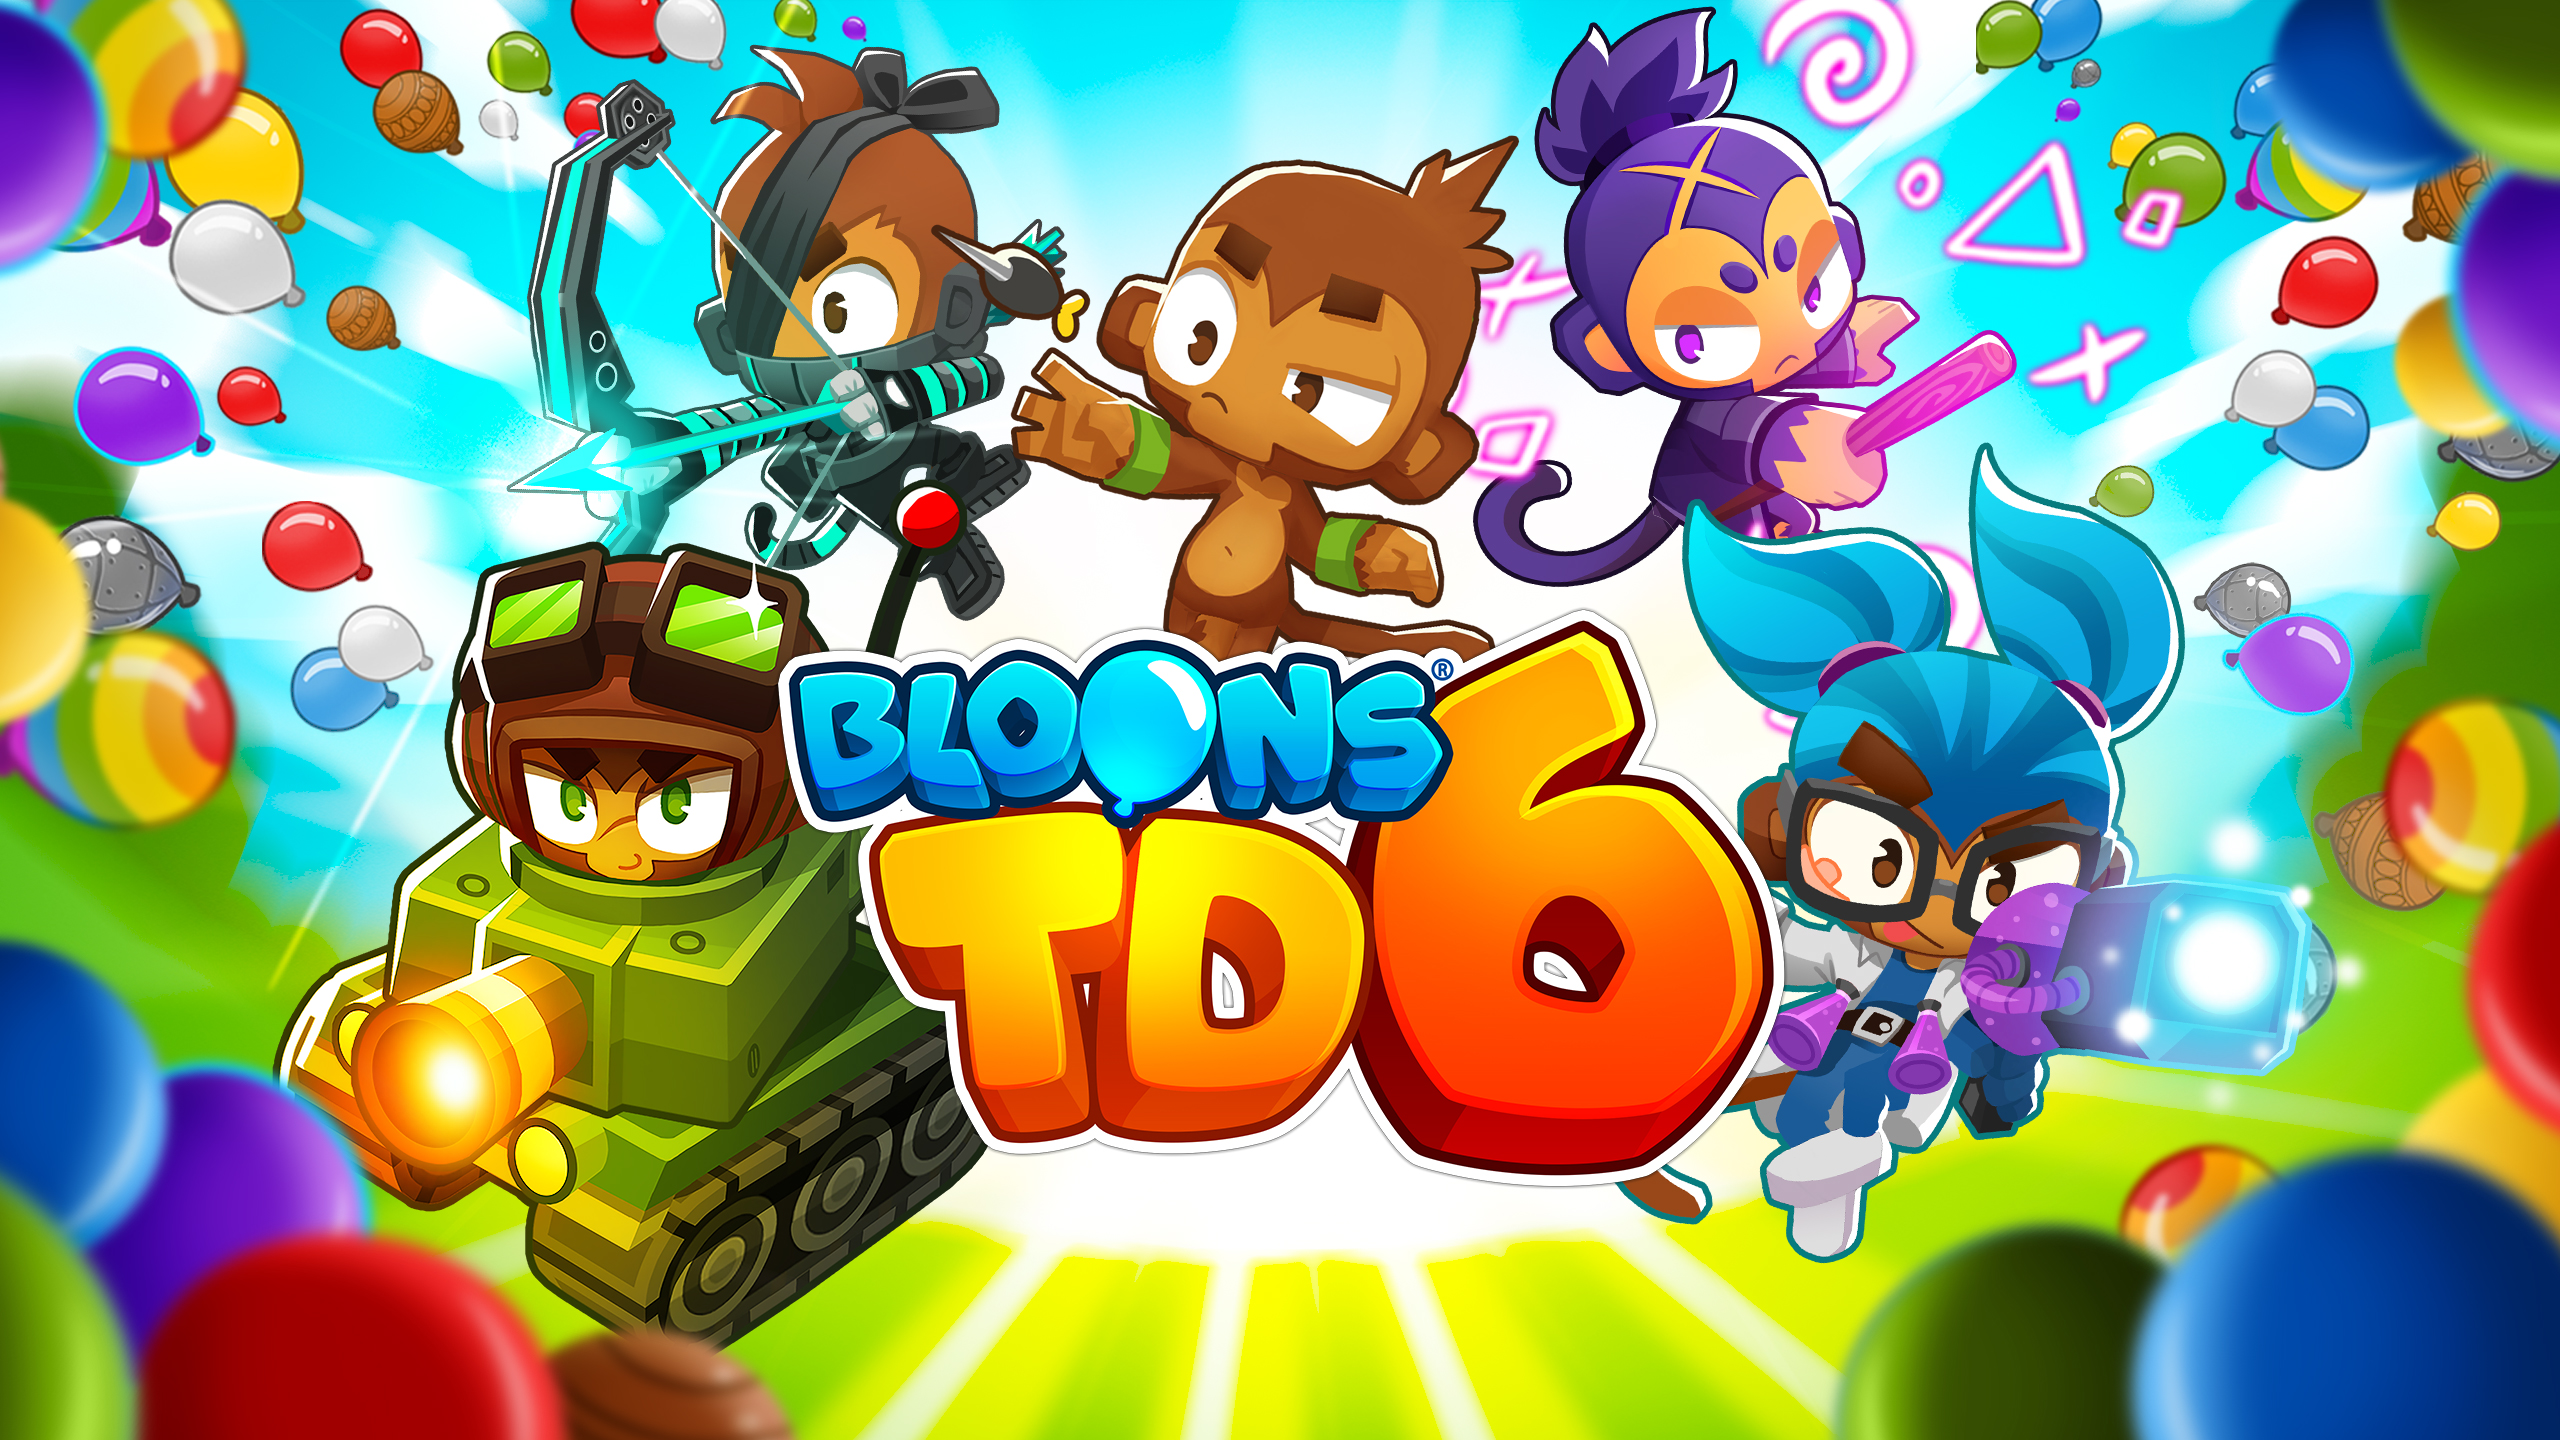 bloon td 6 modded apk not working